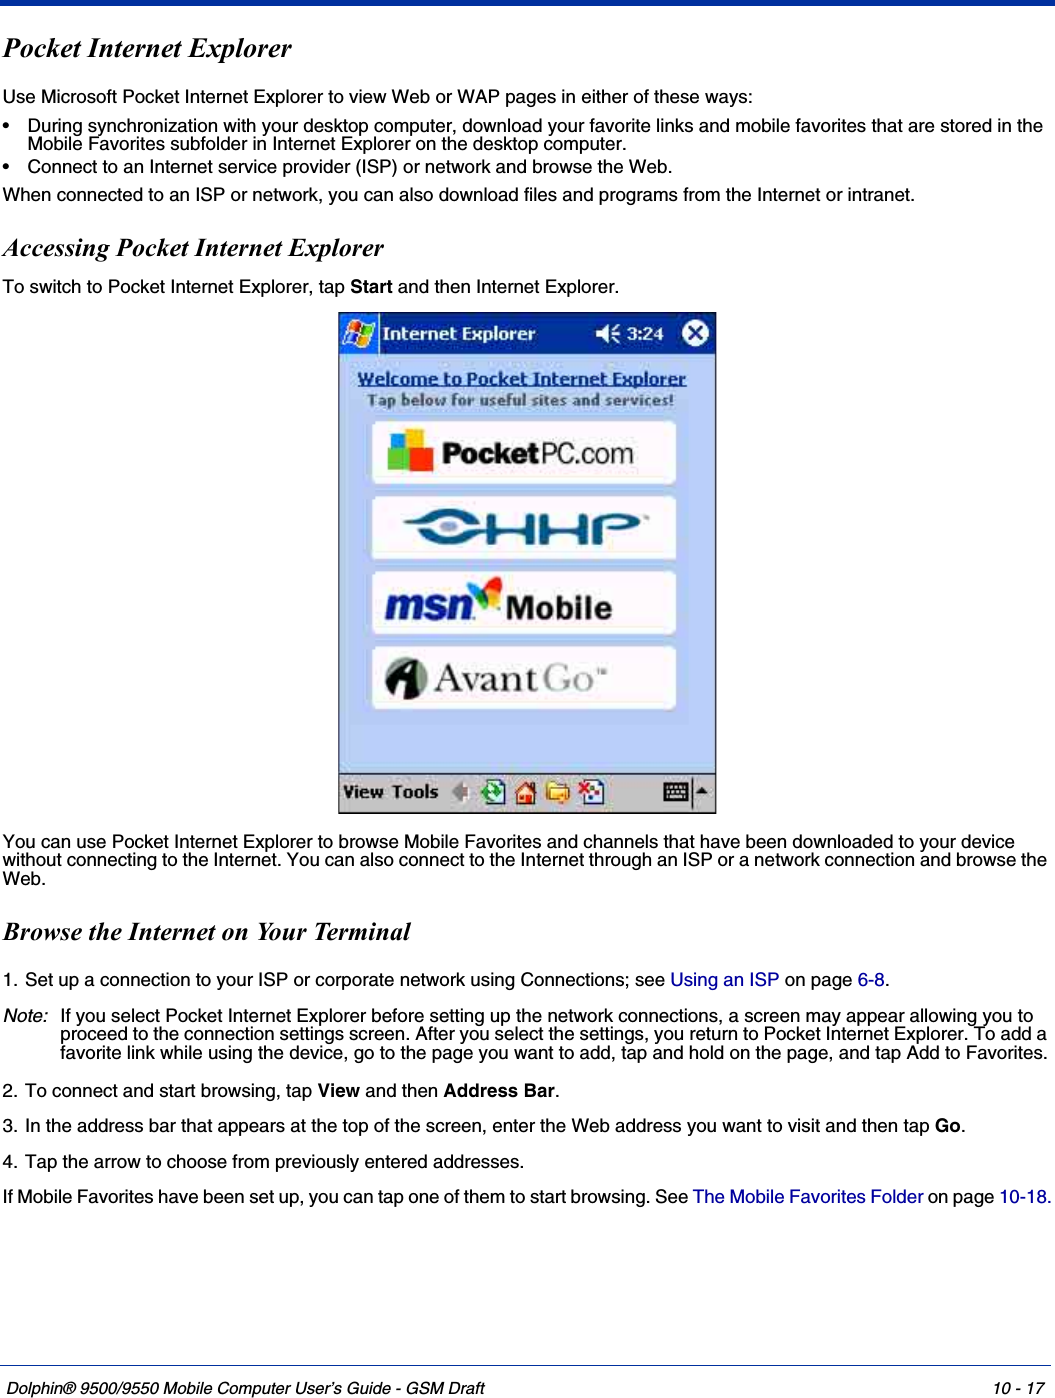 Dolphin® 9500/9550 Mobile Computer User’s Guide - GSM Draft 10 - 17Pocket Internet Explorer Use Microsoft Pocket Internet Explorer to view Web or WAP pages in either of these ways:• During synchronization with your desktop computer, download your favorite links and mobile favorites that are stored in the Mobile Favorites subfolder in Internet Explorer on the desktop computer.• Connect to an Internet service provider (ISP) or network and browse the Web. When connected to an ISP or network, you can also download files and programs from the Internet or intranet.Accessing Pocket Internet ExplorerTo switch to Pocket Internet Explorer, tap Start and then Internet Explorer.You can use Pocket Internet Explorer to browse Mobile Favorites and channels that have been downloaded to your device without connecting to the Internet. You can also connect to the Internet through an ISP or a network connection and browse the Web.Browse the Internet on Your Terminal1. Set up a connection to your ISP or corporate network using Connections; see Using an ISP on page 6-8.Note: If you select Pocket Internet Explorer before setting up the network connections, a screen may appear allowing you to proceed to the connection settings screen. After you select the settings, you return to Pocket Internet Explorer. To add a favorite link while using the device, go to the page you want to add, tap and hold on the page, and tap Add to Favorites.2. To connect and start browsing, tap View and then Address Bar. 3. In the address bar that appears at the top of the screen, enter the Web address you want to visit and then tap Go. 4. Tap the arrow to choose from previously entered addresses.If Mobile Favorites have been set up, you can tap one of them to start browsing. See The Mobile Favorites Folder on page 10-18.